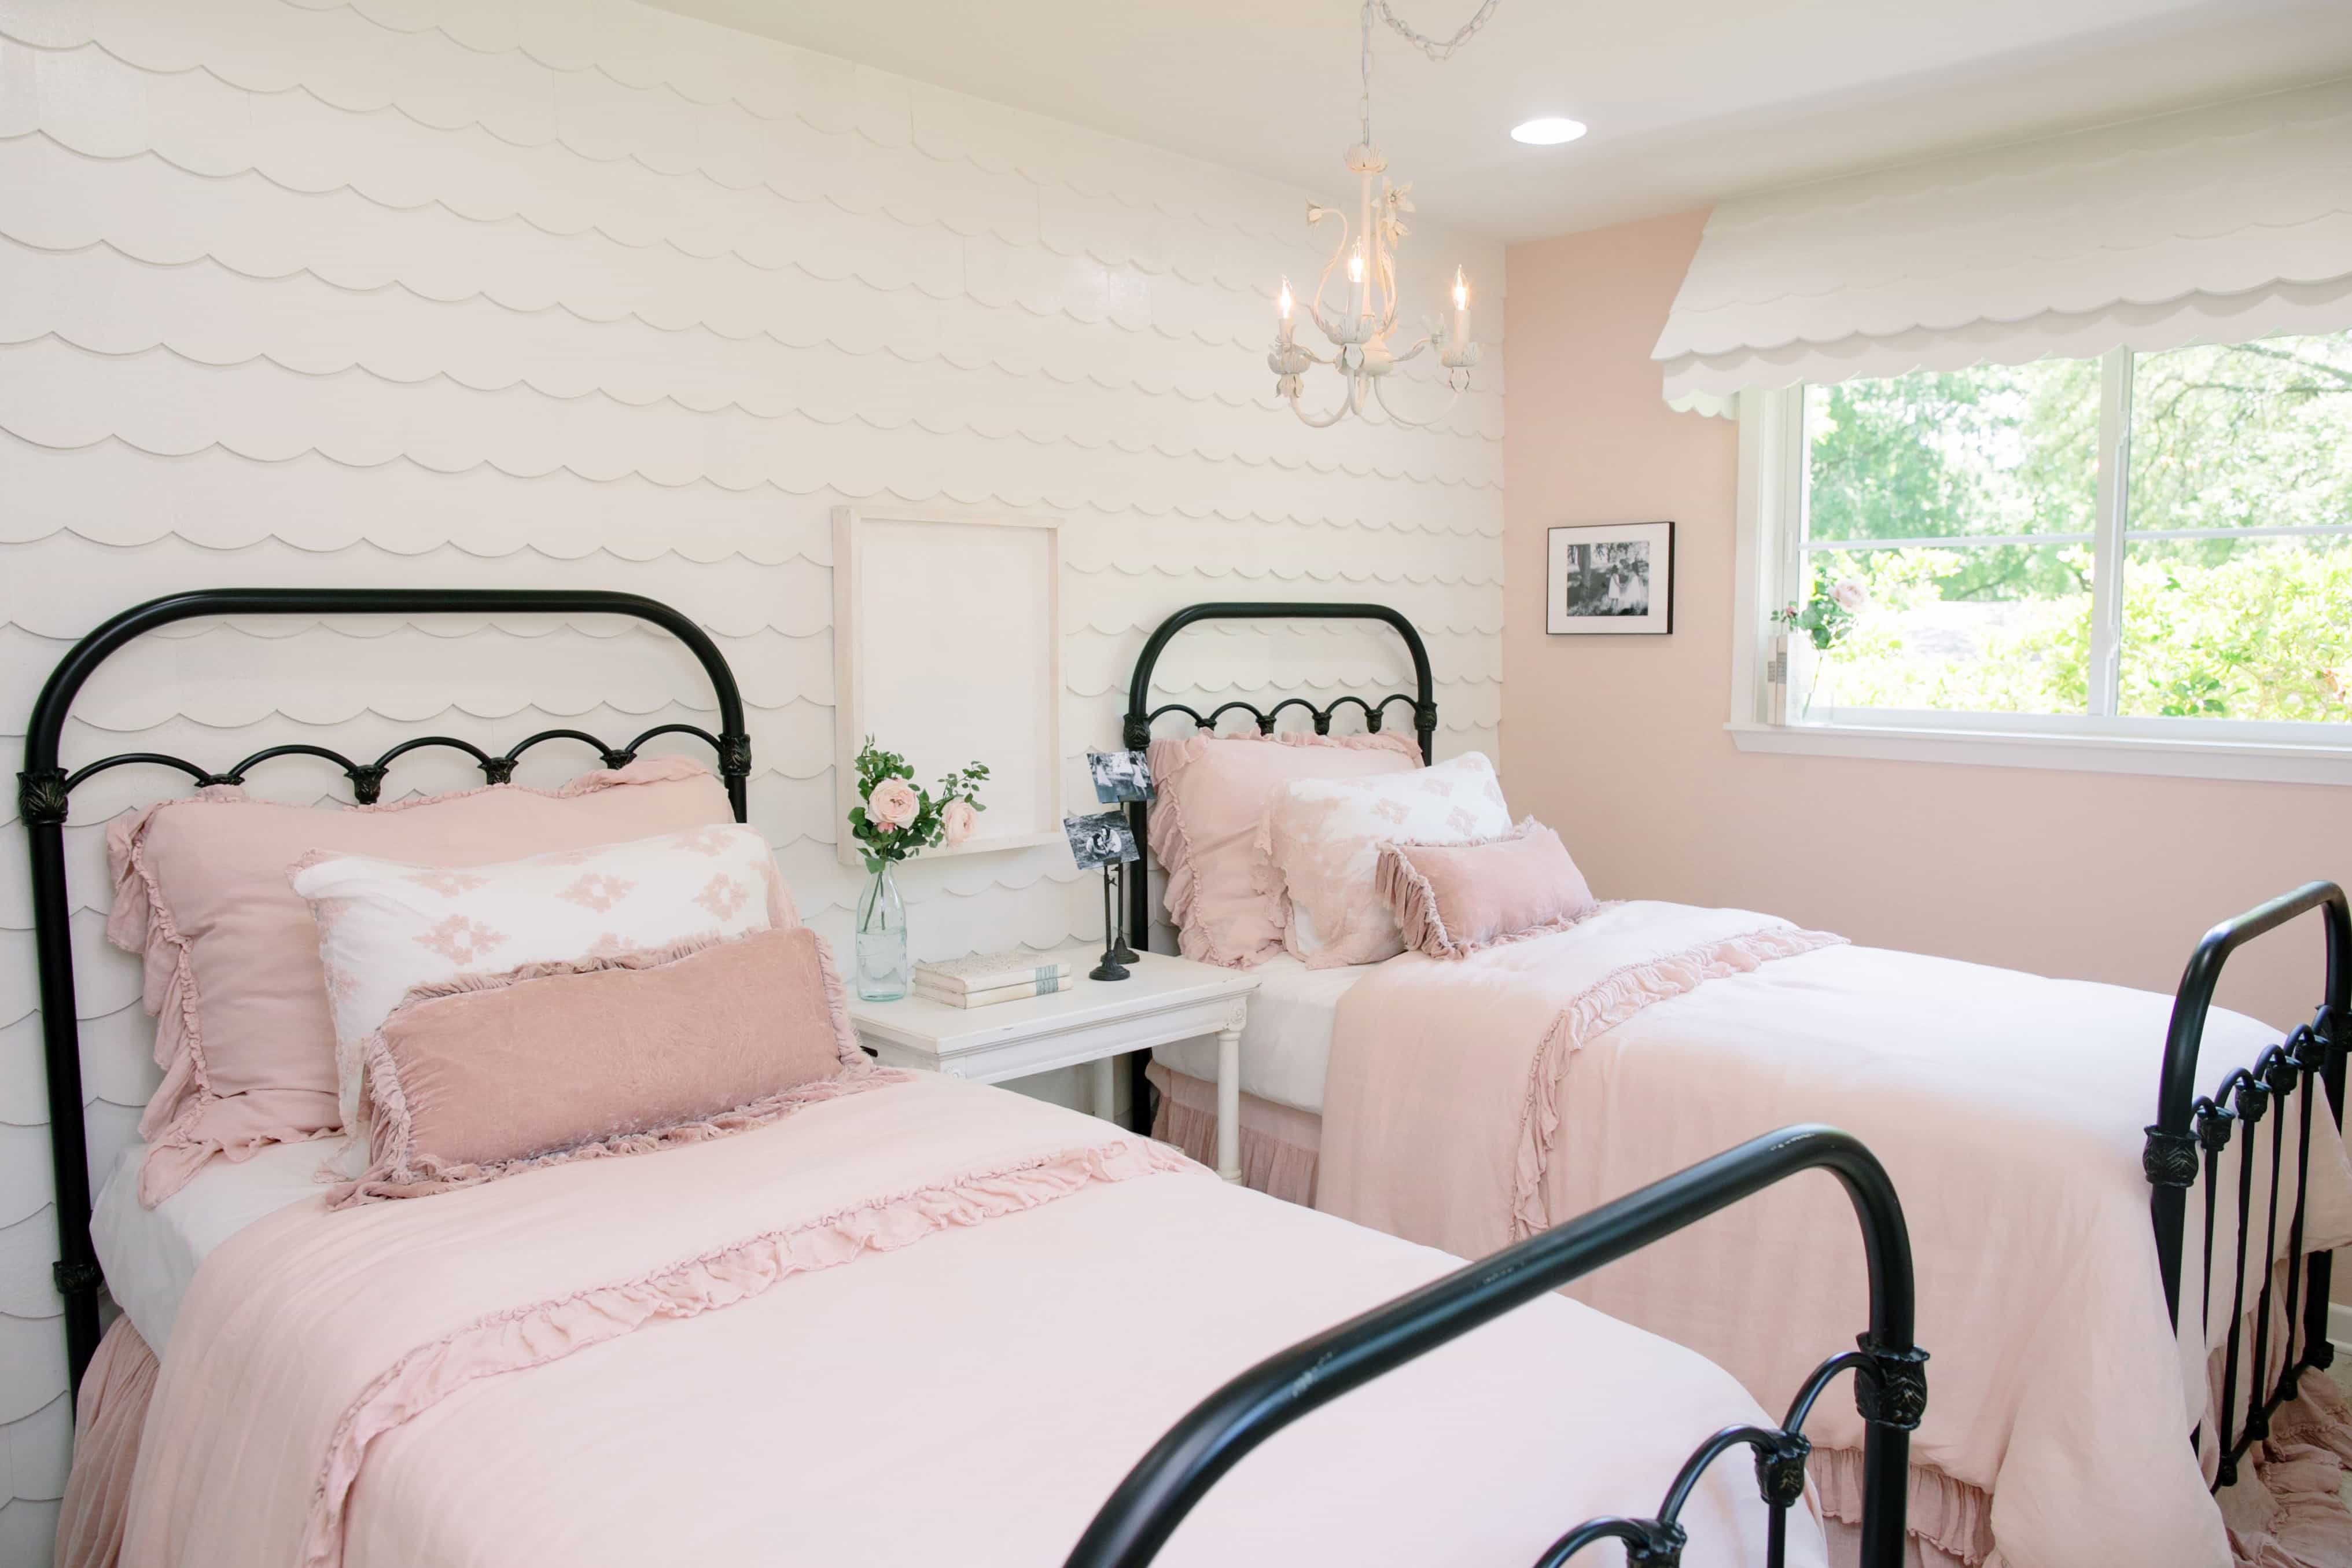 Shabby Chic Girls Dollhouse Bedroom With Ruffled Blush Bed Linens And White Shingle Accent Wall (View 12 of 20)